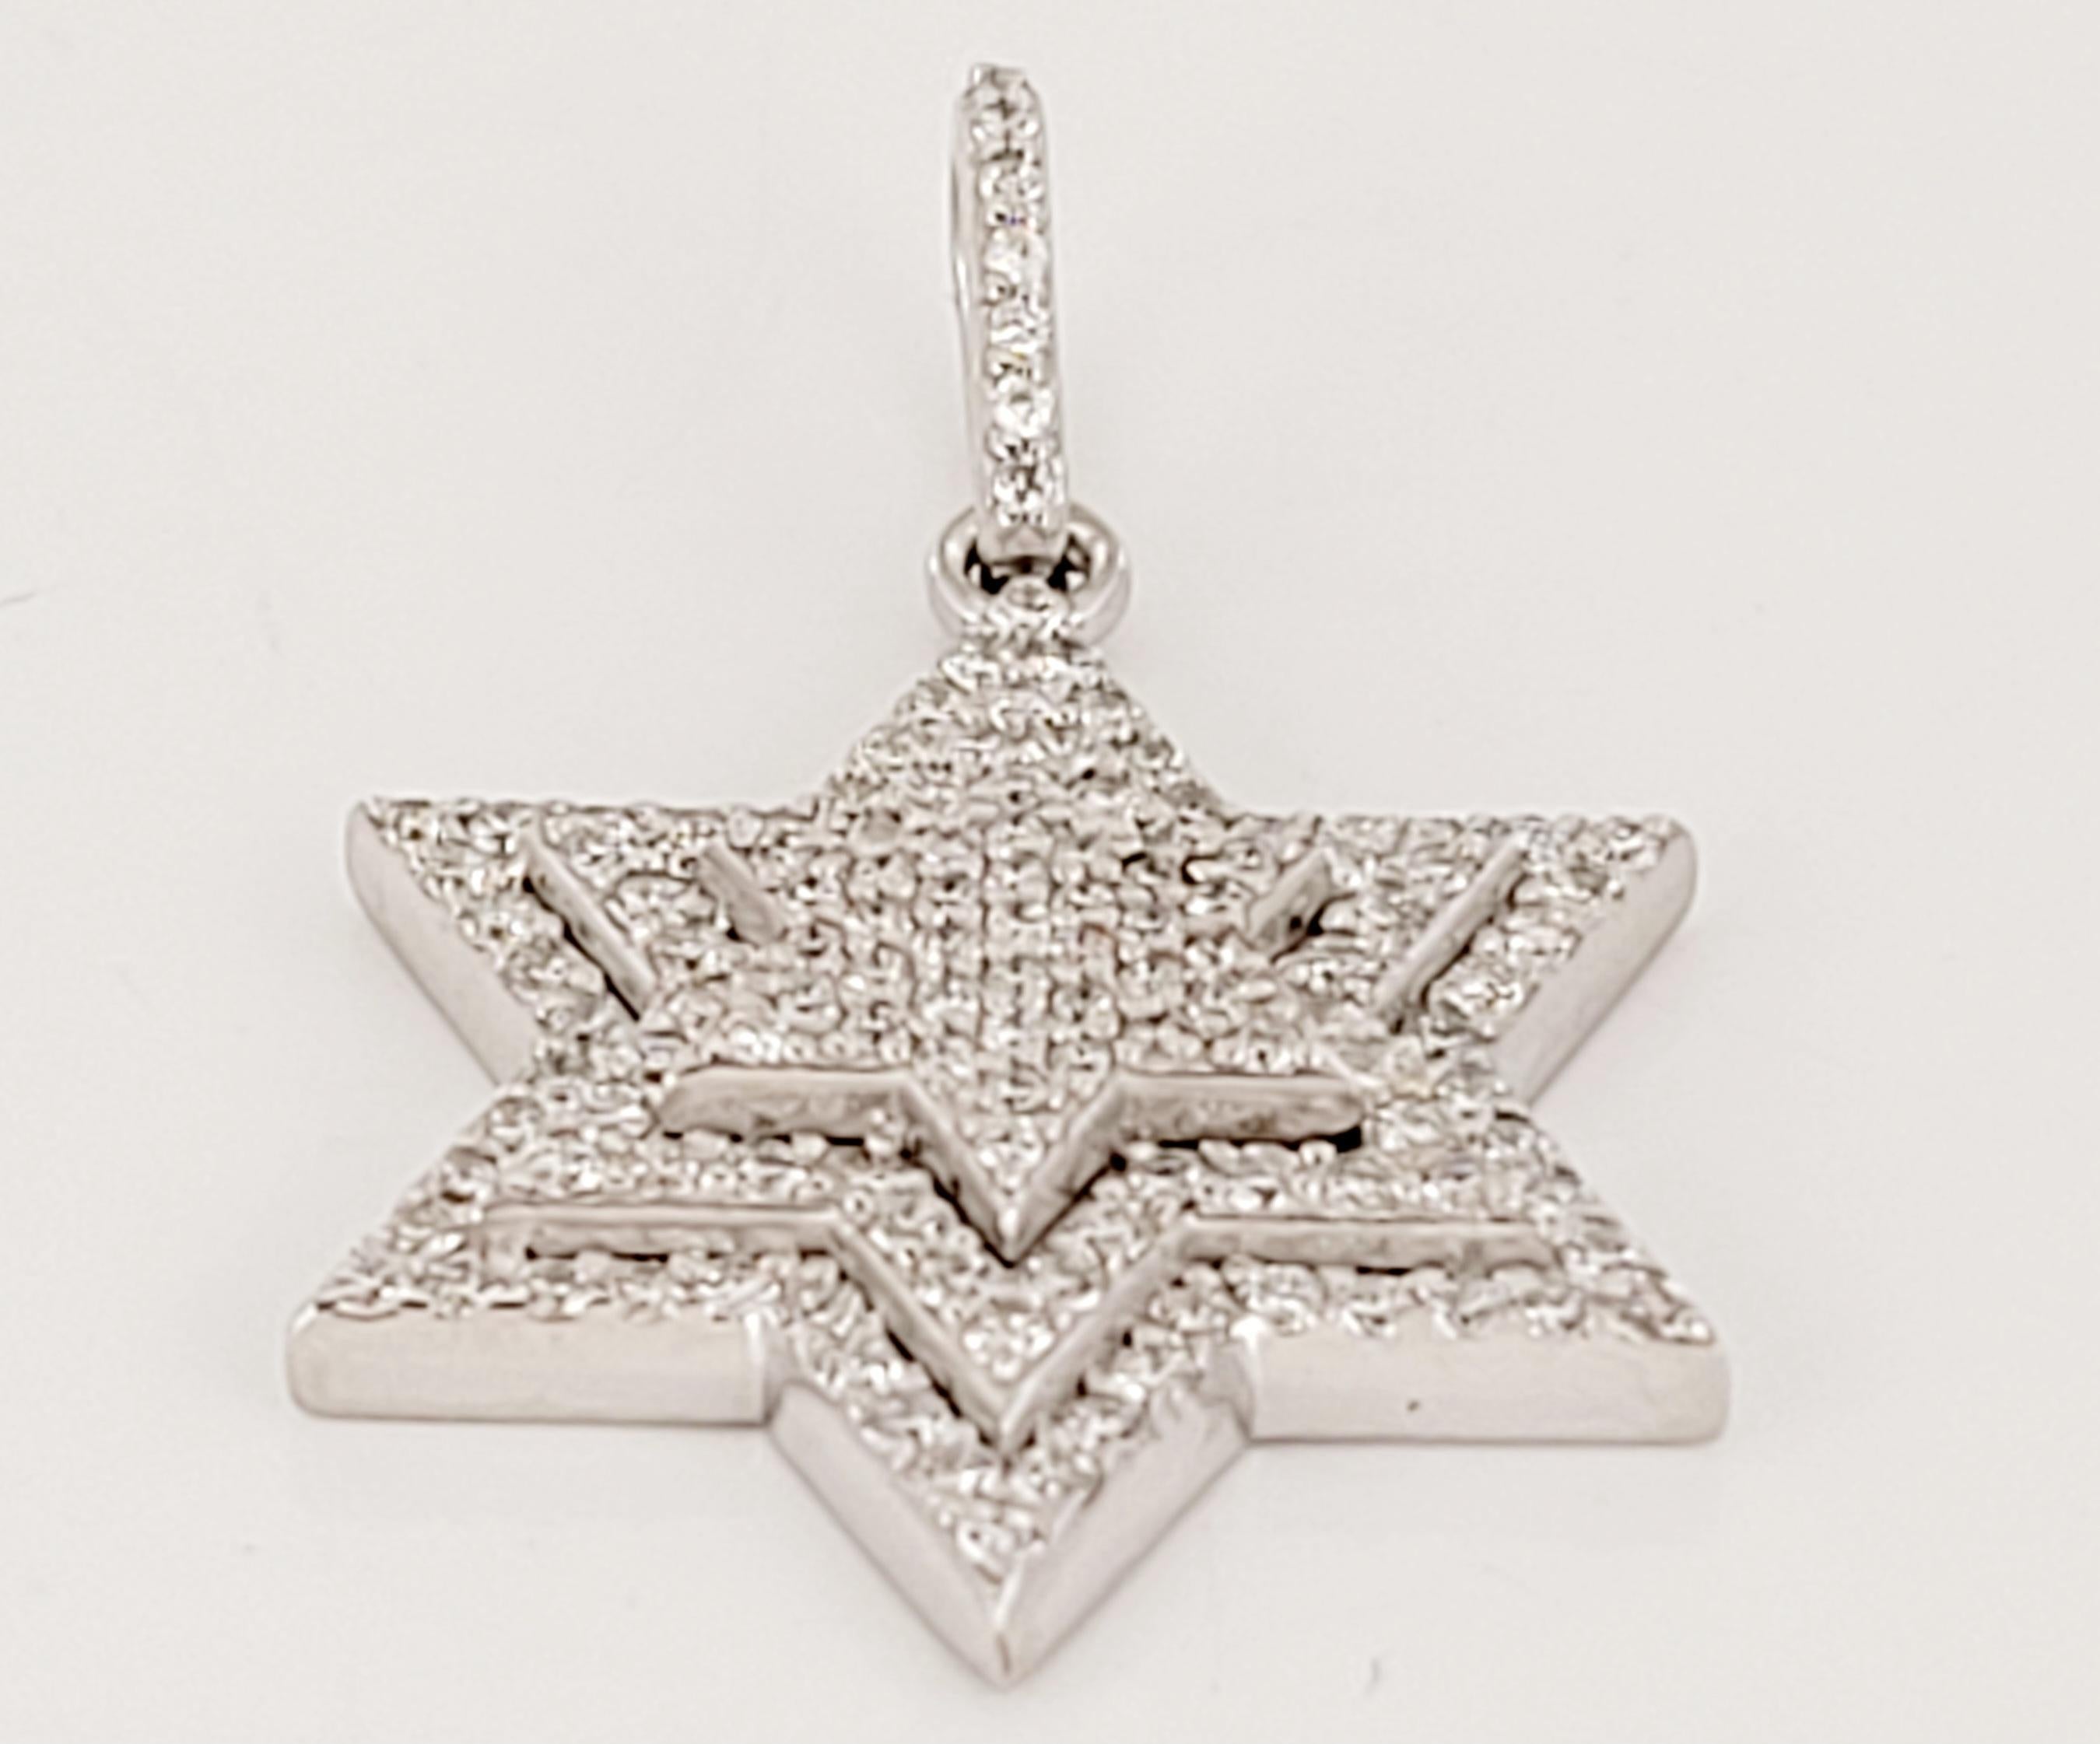 Tree Layer Star shape Pendant 
Metal: 14K White 
Diamond: .25ct
Clarity: VS
Color Grade: G
Weight:2.6gr 
Dimension:19.7mm
With Bail:27.5mm 
Condition New, never worn.
Retail Price: $1600